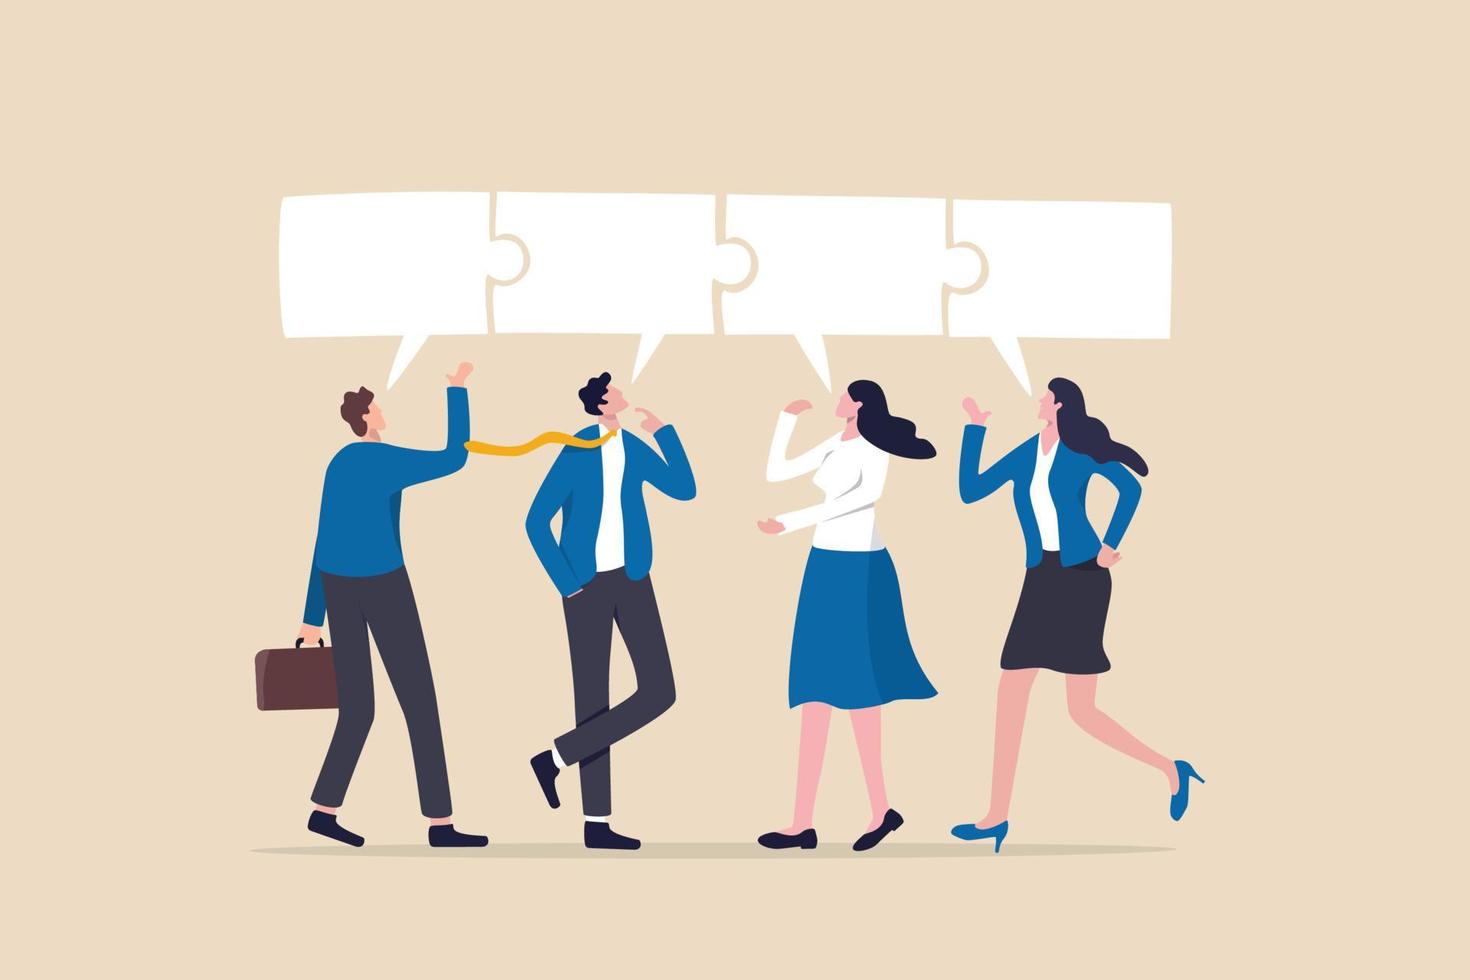 Conversation or communication for success, meeting discussion to get answer or solution, working together, partnership or collaboration concept, business people talk with speech bubble jigsaw connect. vector